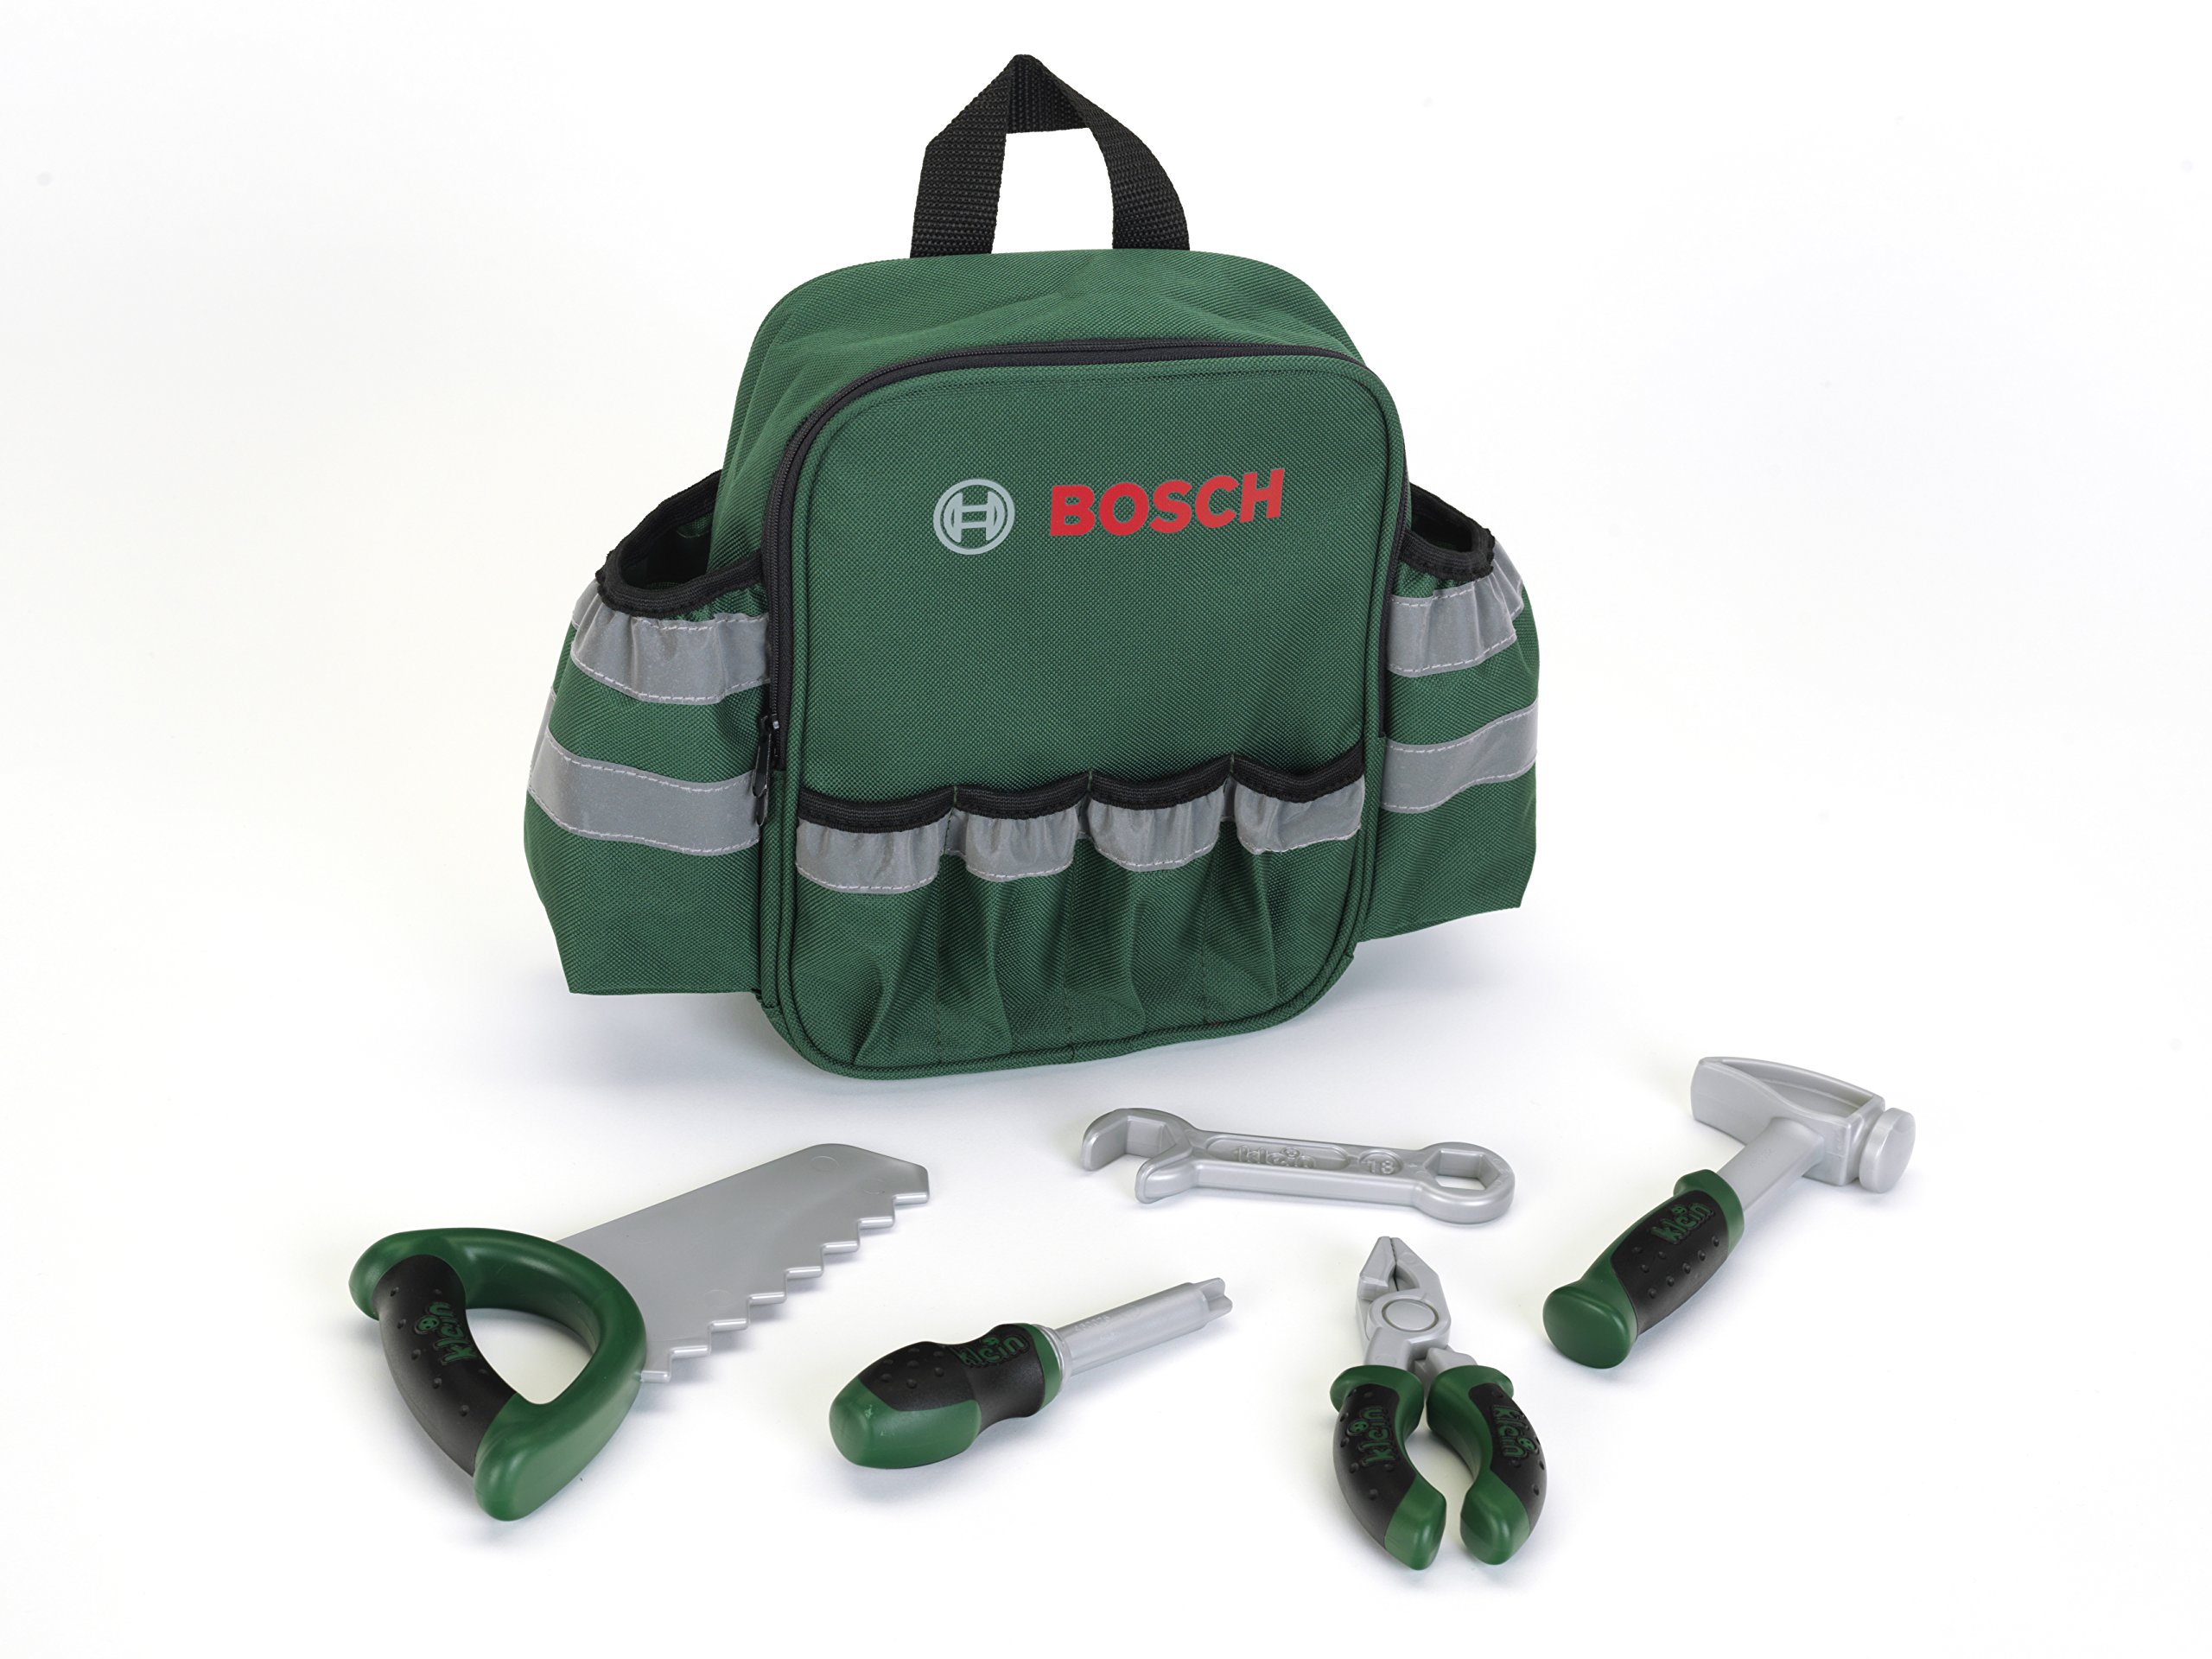 Bosch Rucksack With Manual Tools